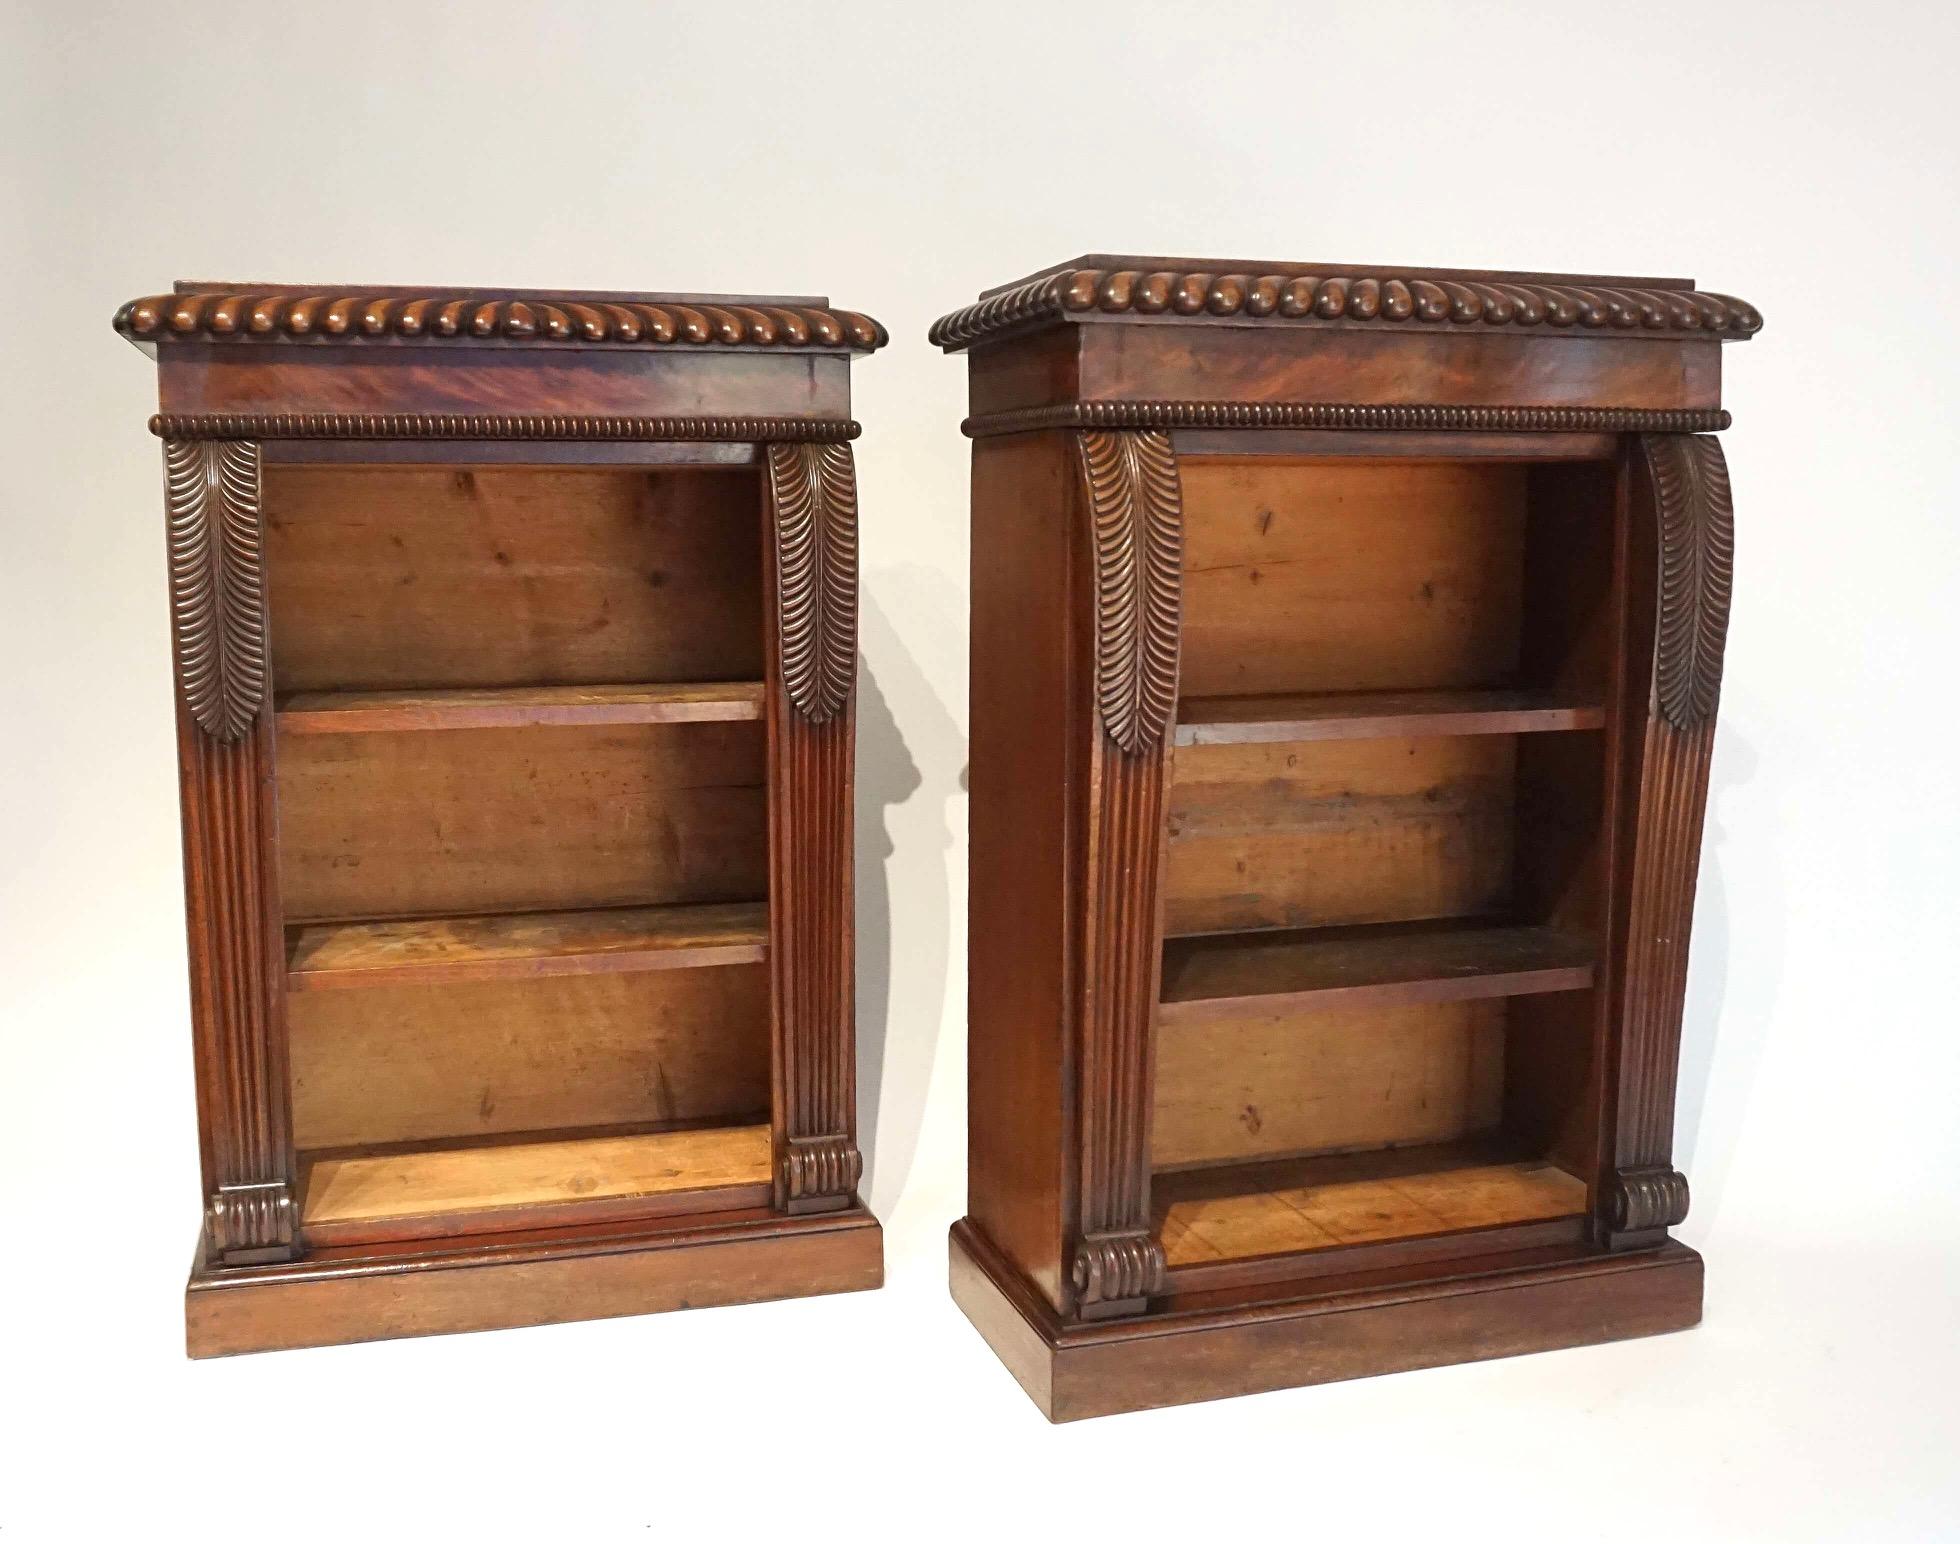 Elegant and fine pair of circa 1825 neoclassical English regency period dwarf open bookcases; the 'plum pudding' mahogany raised tops with thickly gadrooned edges above flat frieze and beaded border surmounting two shelf open compartment with